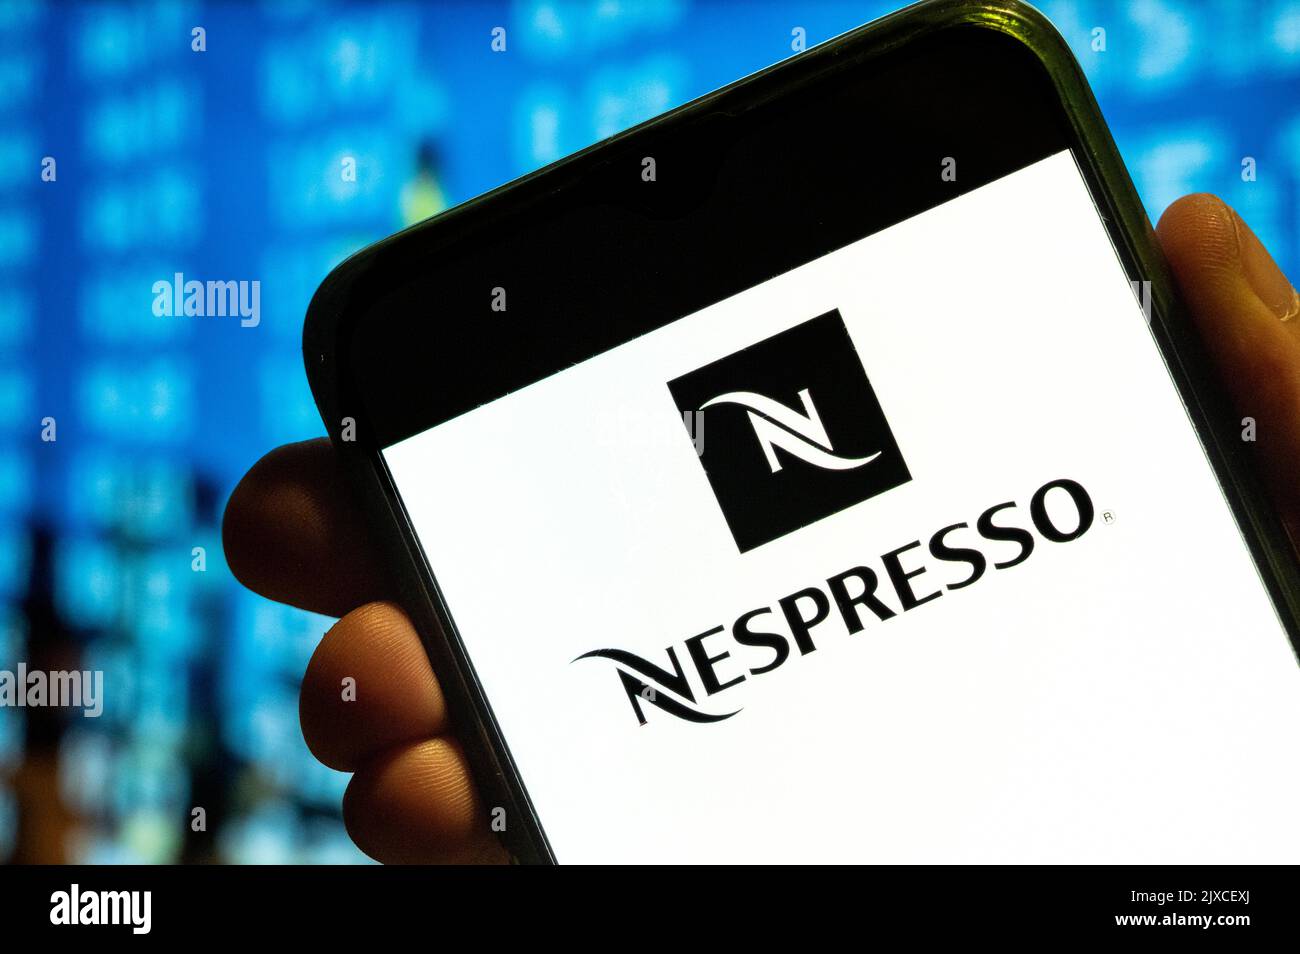 In this photo illustration, the Swiss high-end and world leader in coffee capsules brand store Nespresso logo is displayed on a smartphone screen. Stock Photo